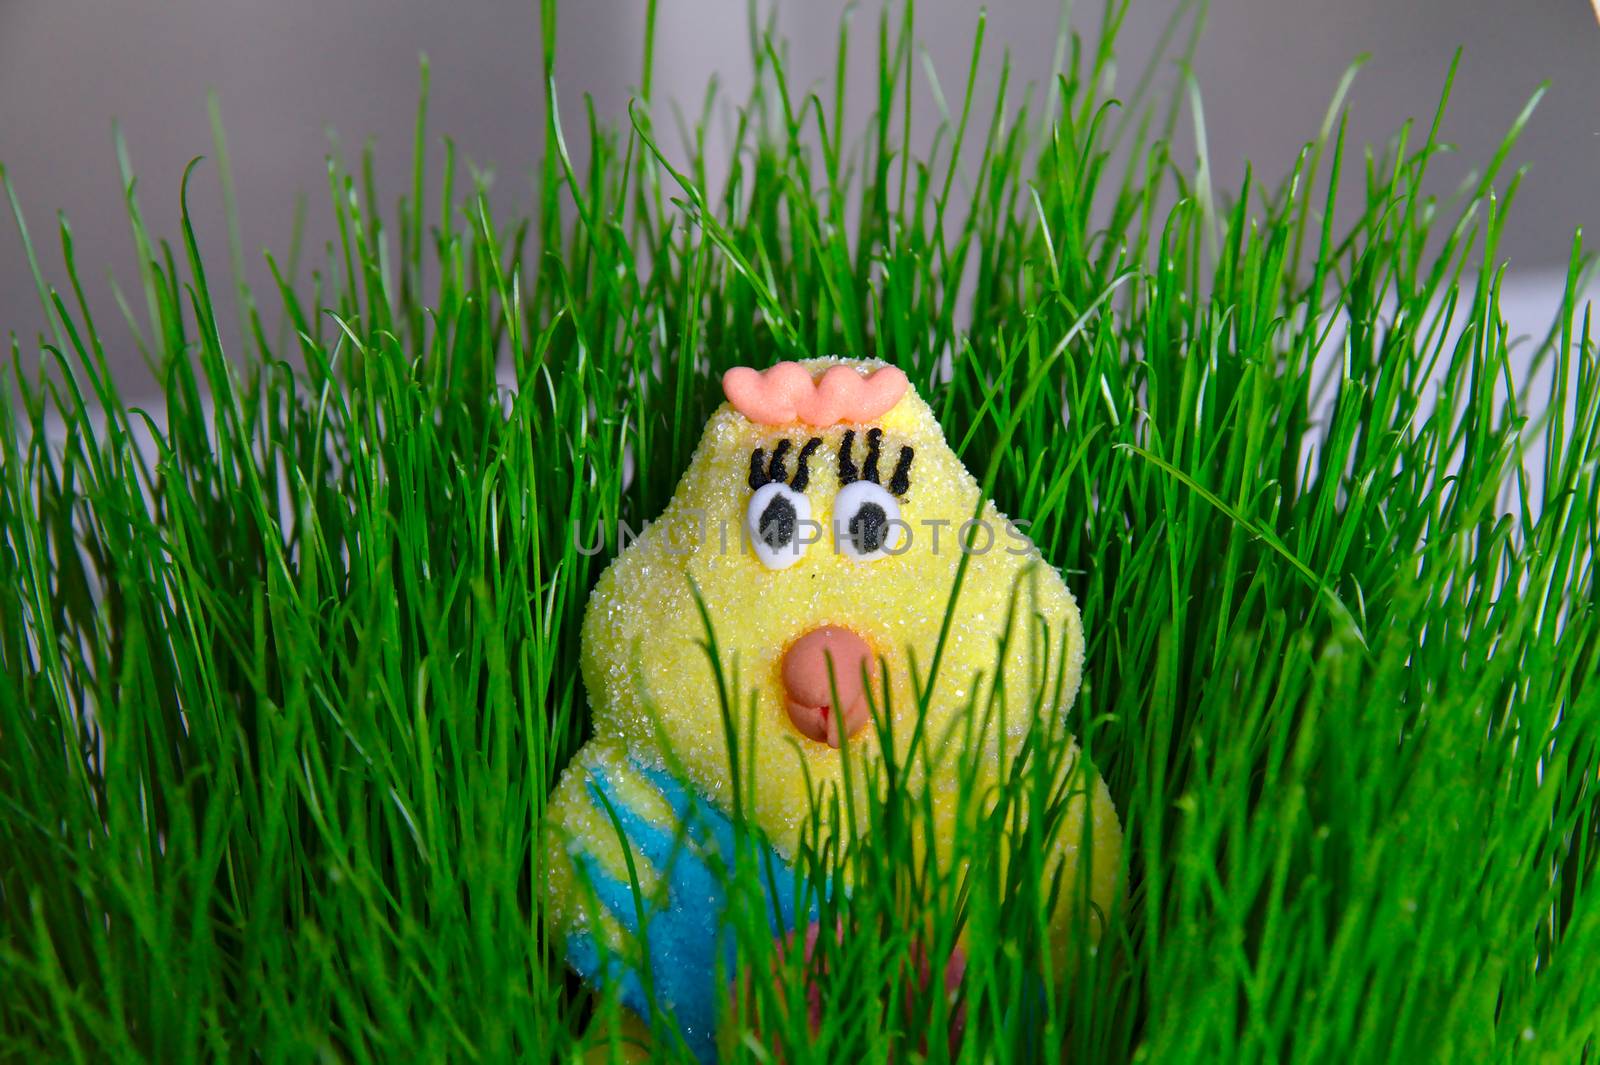 Close photo of cutest Easter chick candy ever made. Easter decoration in the basket filled with fresh green grass.